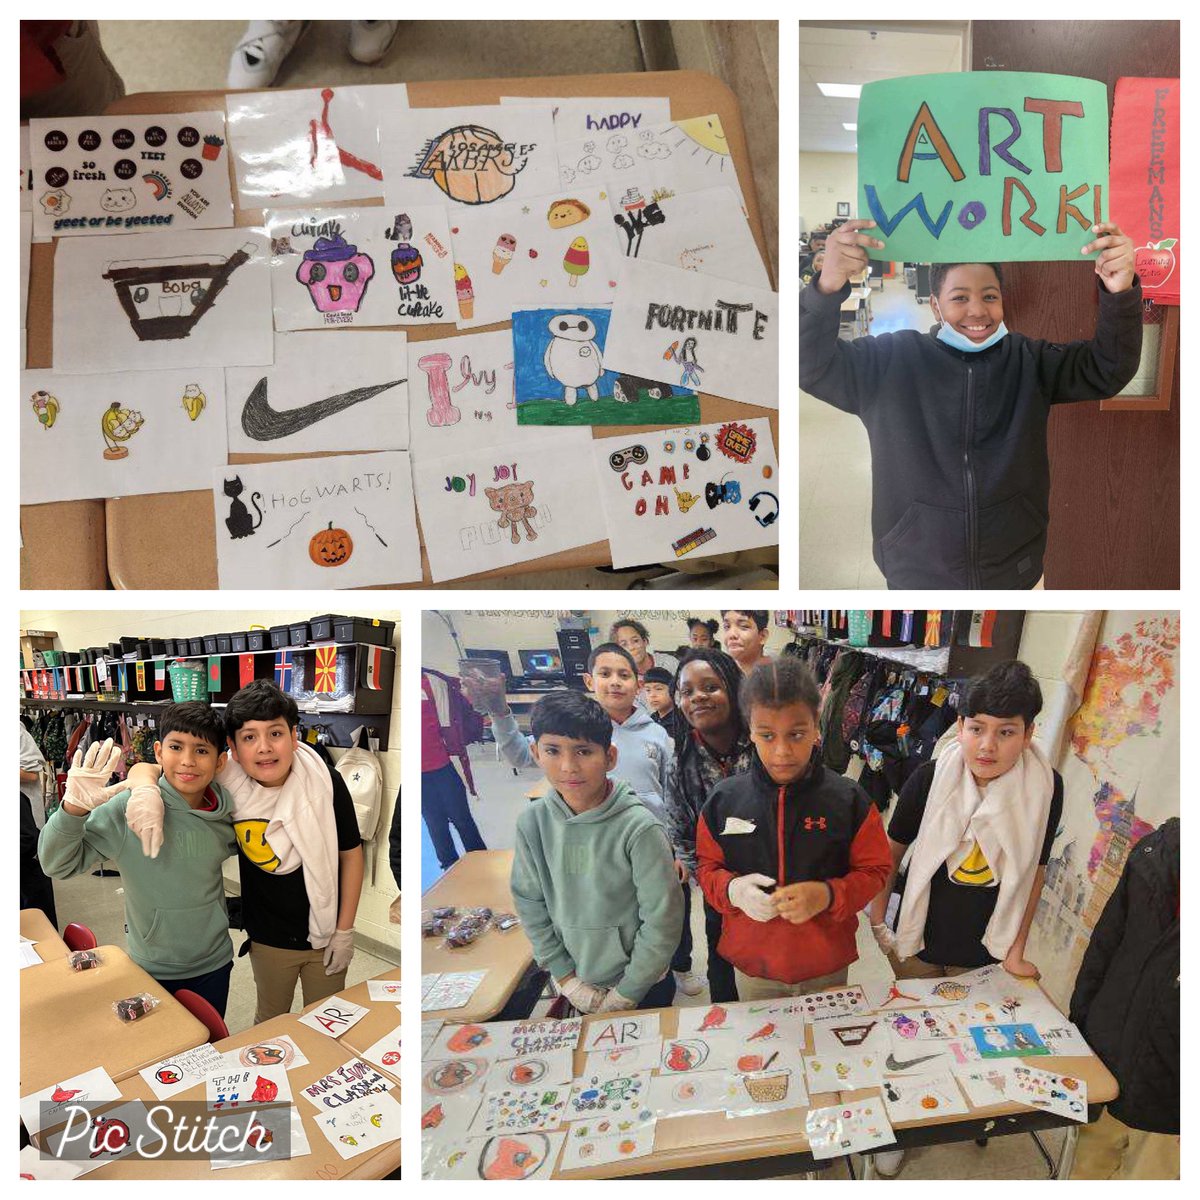 “The BEST day EVER”~4th Gr Scholar. Our Financial Literacy Market opened. 3rd-5th graders created goods & provided services to our PreK-2nd scholars.Thanks to @leadersgives for supporting our vision/event,providing scholars with valuable knowledge. @DrShemon @JMCSchools #BestInTN